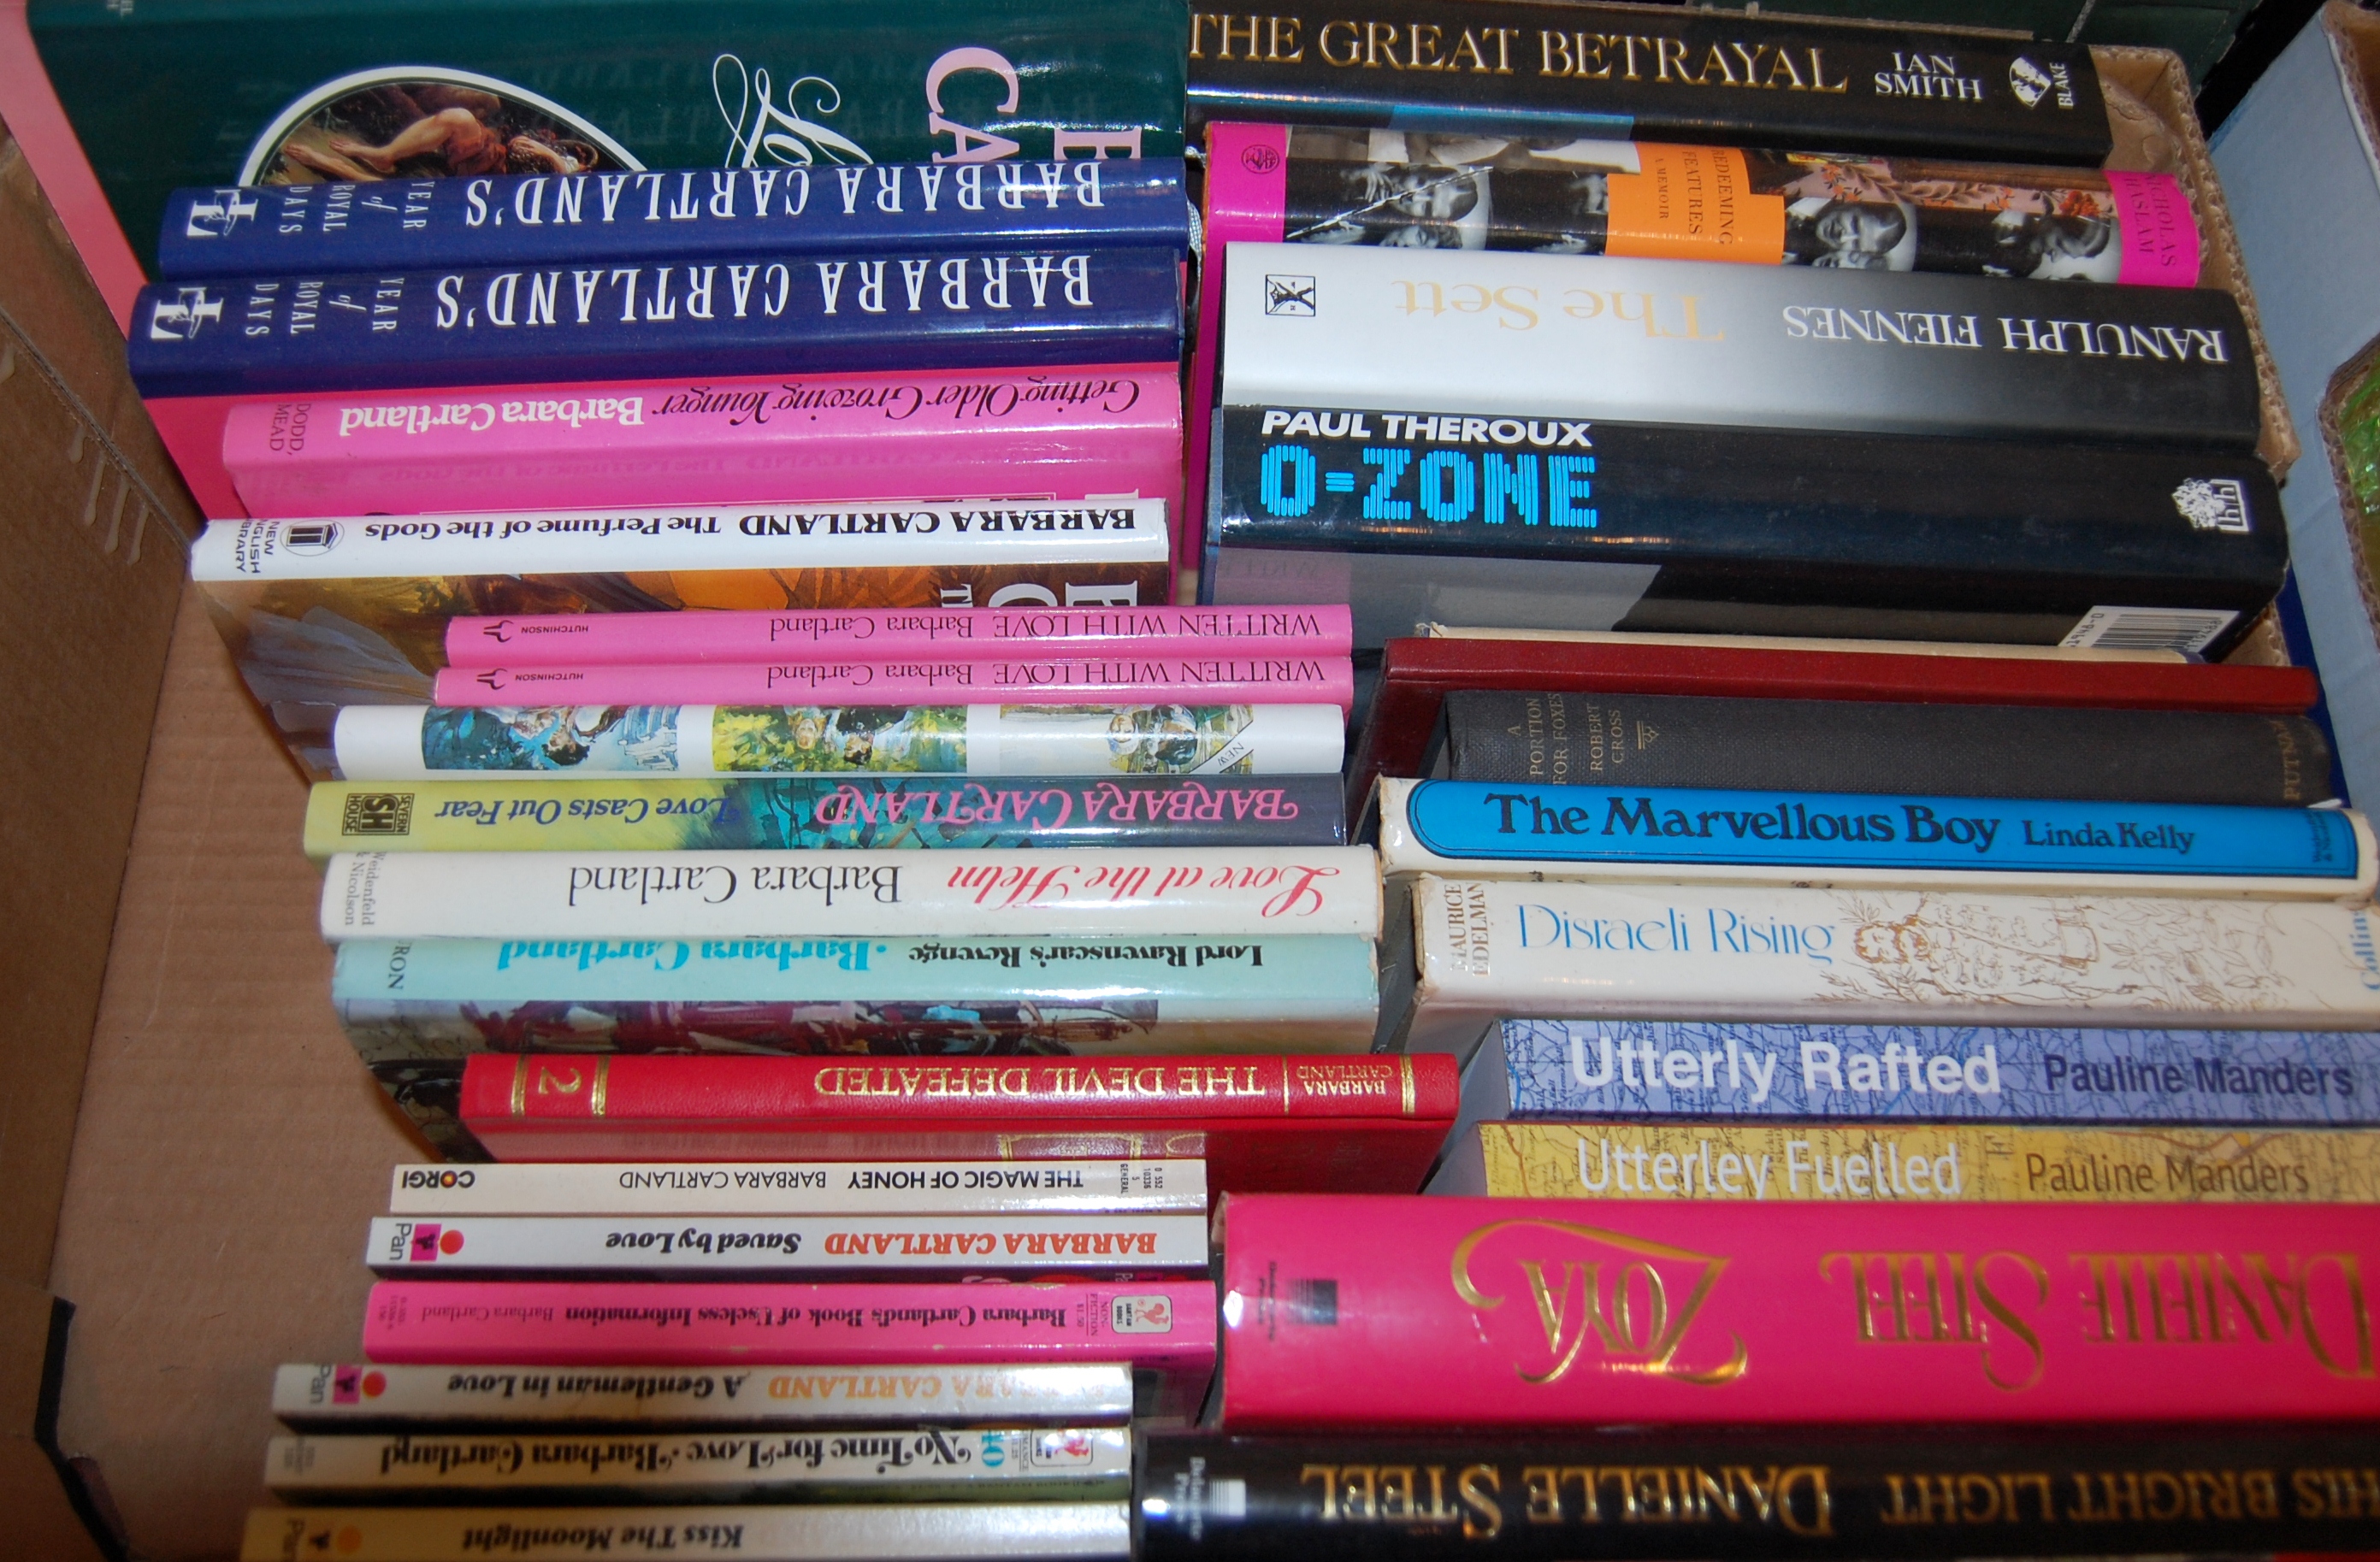 A collection of signed books to include 22 Barbara Cartland examples